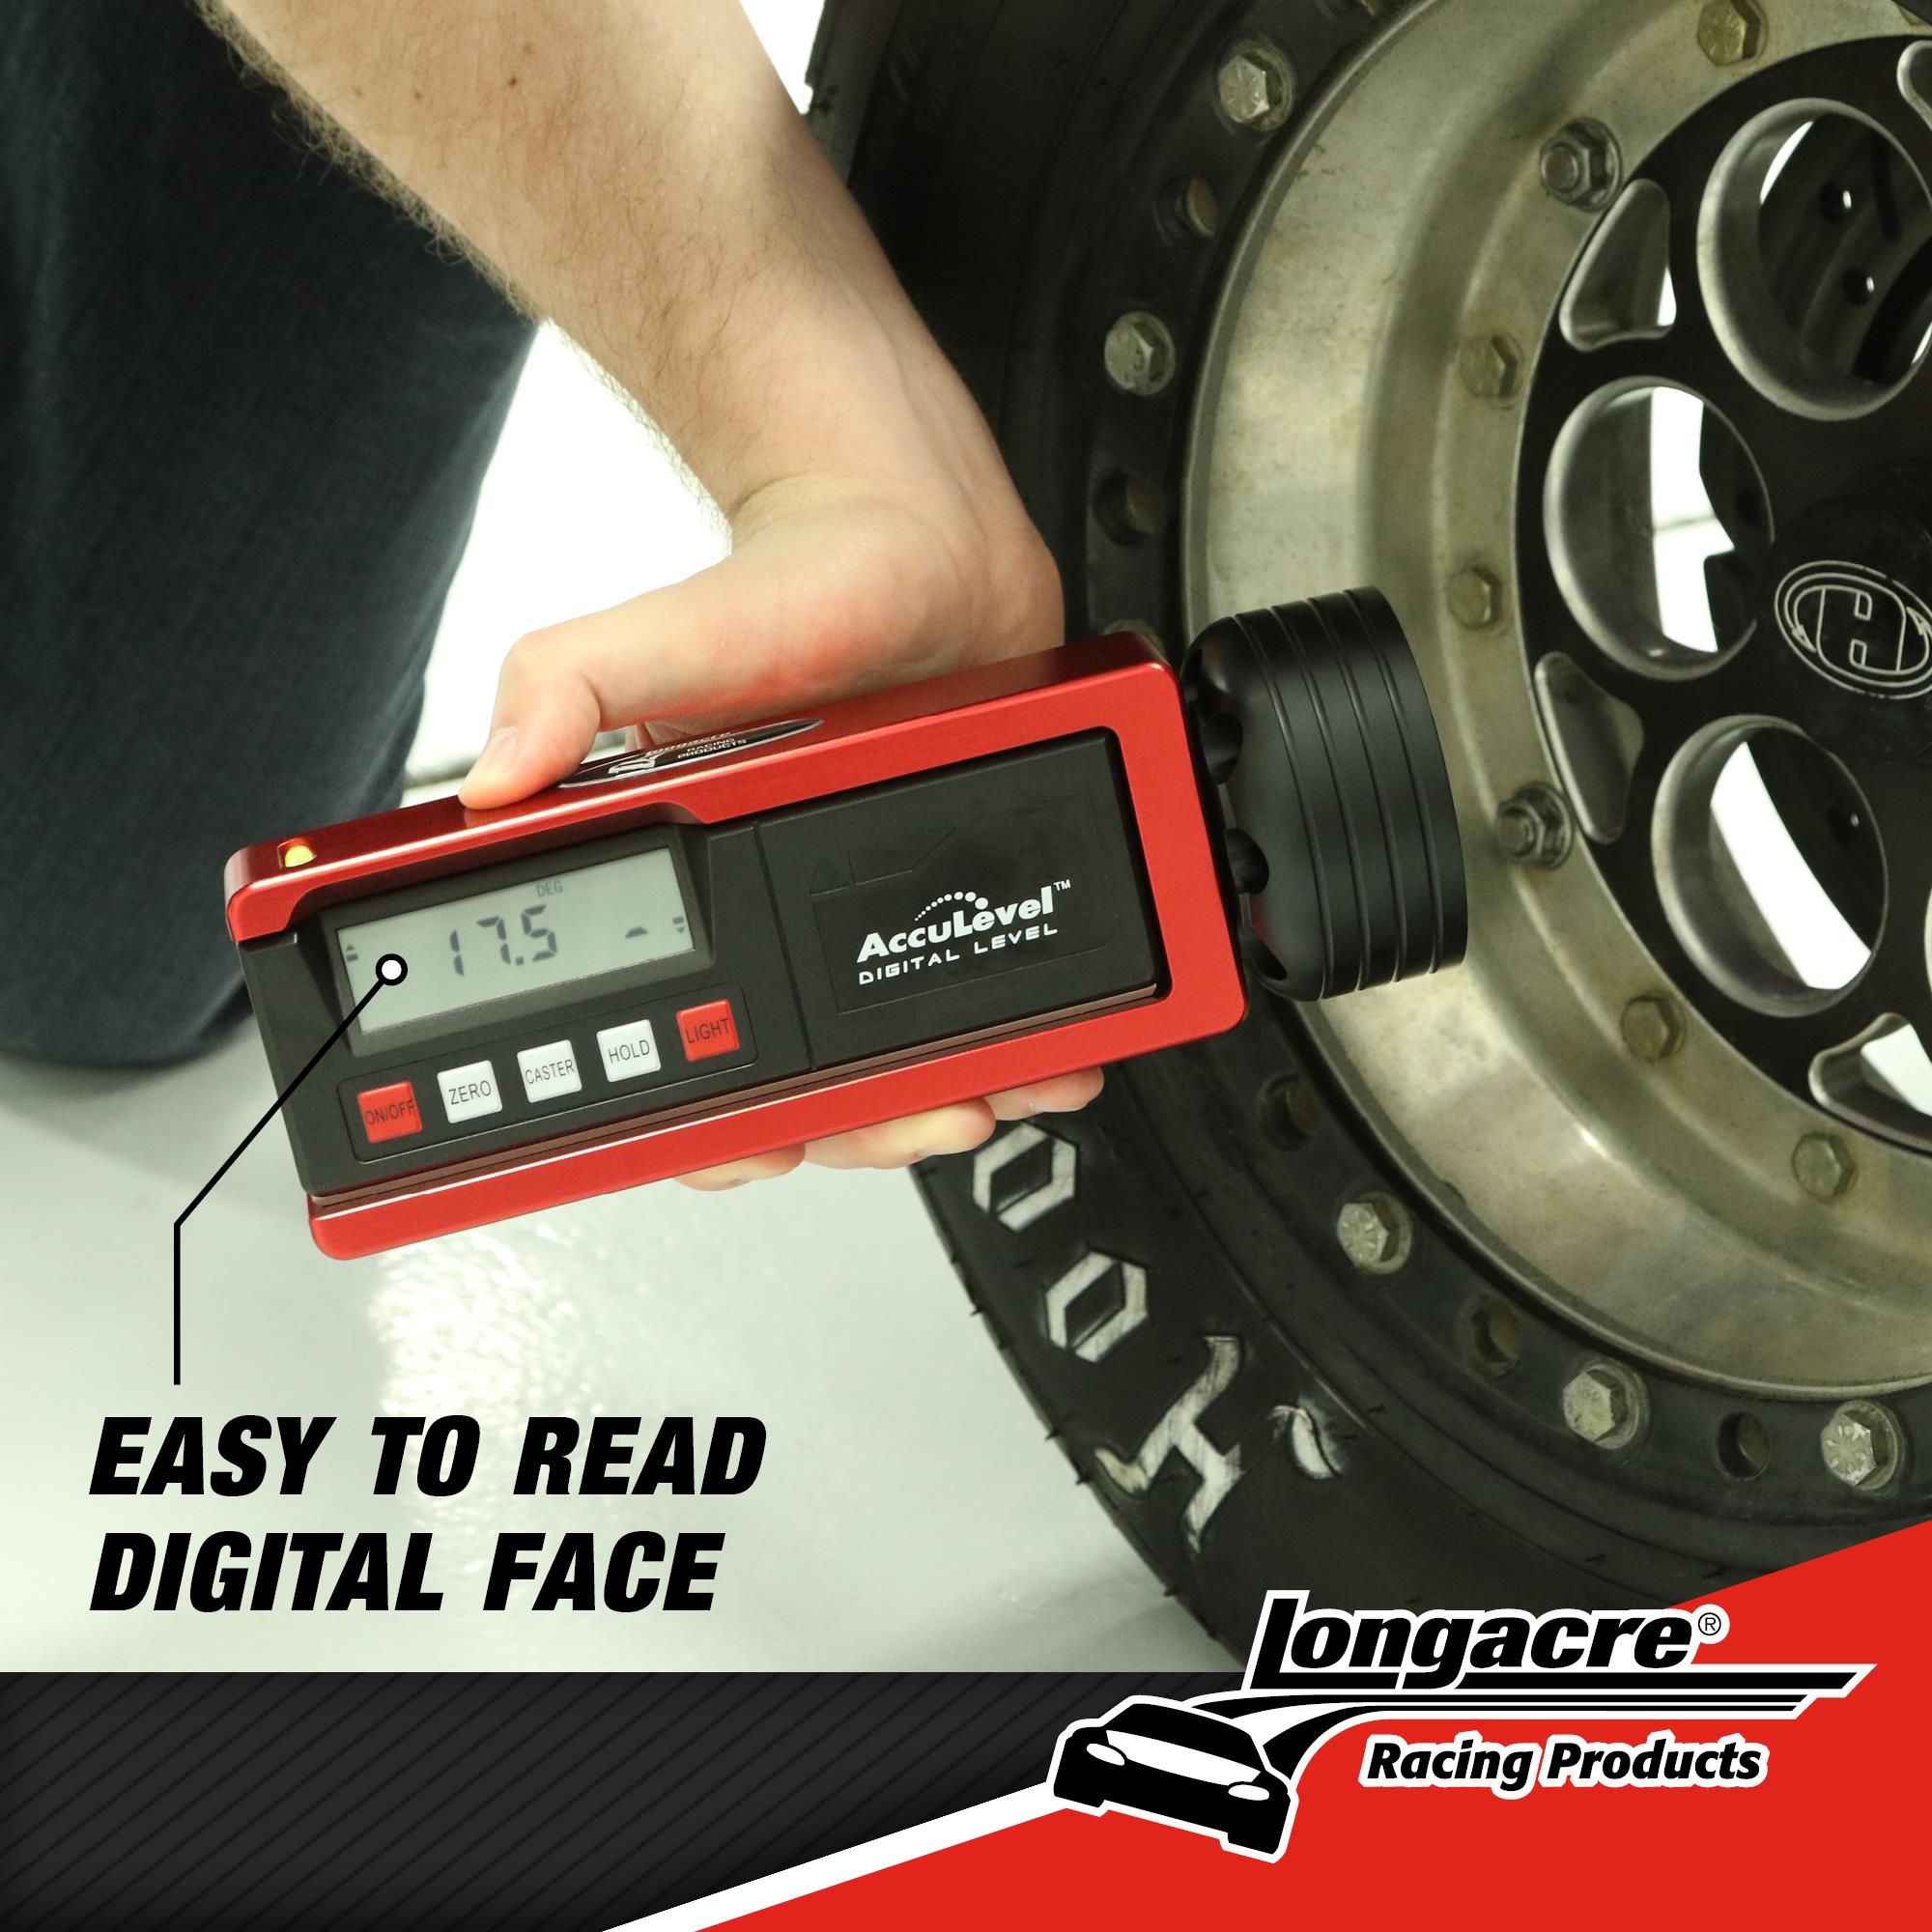 Digital Caster / Camber Gauge with AccuLevel™